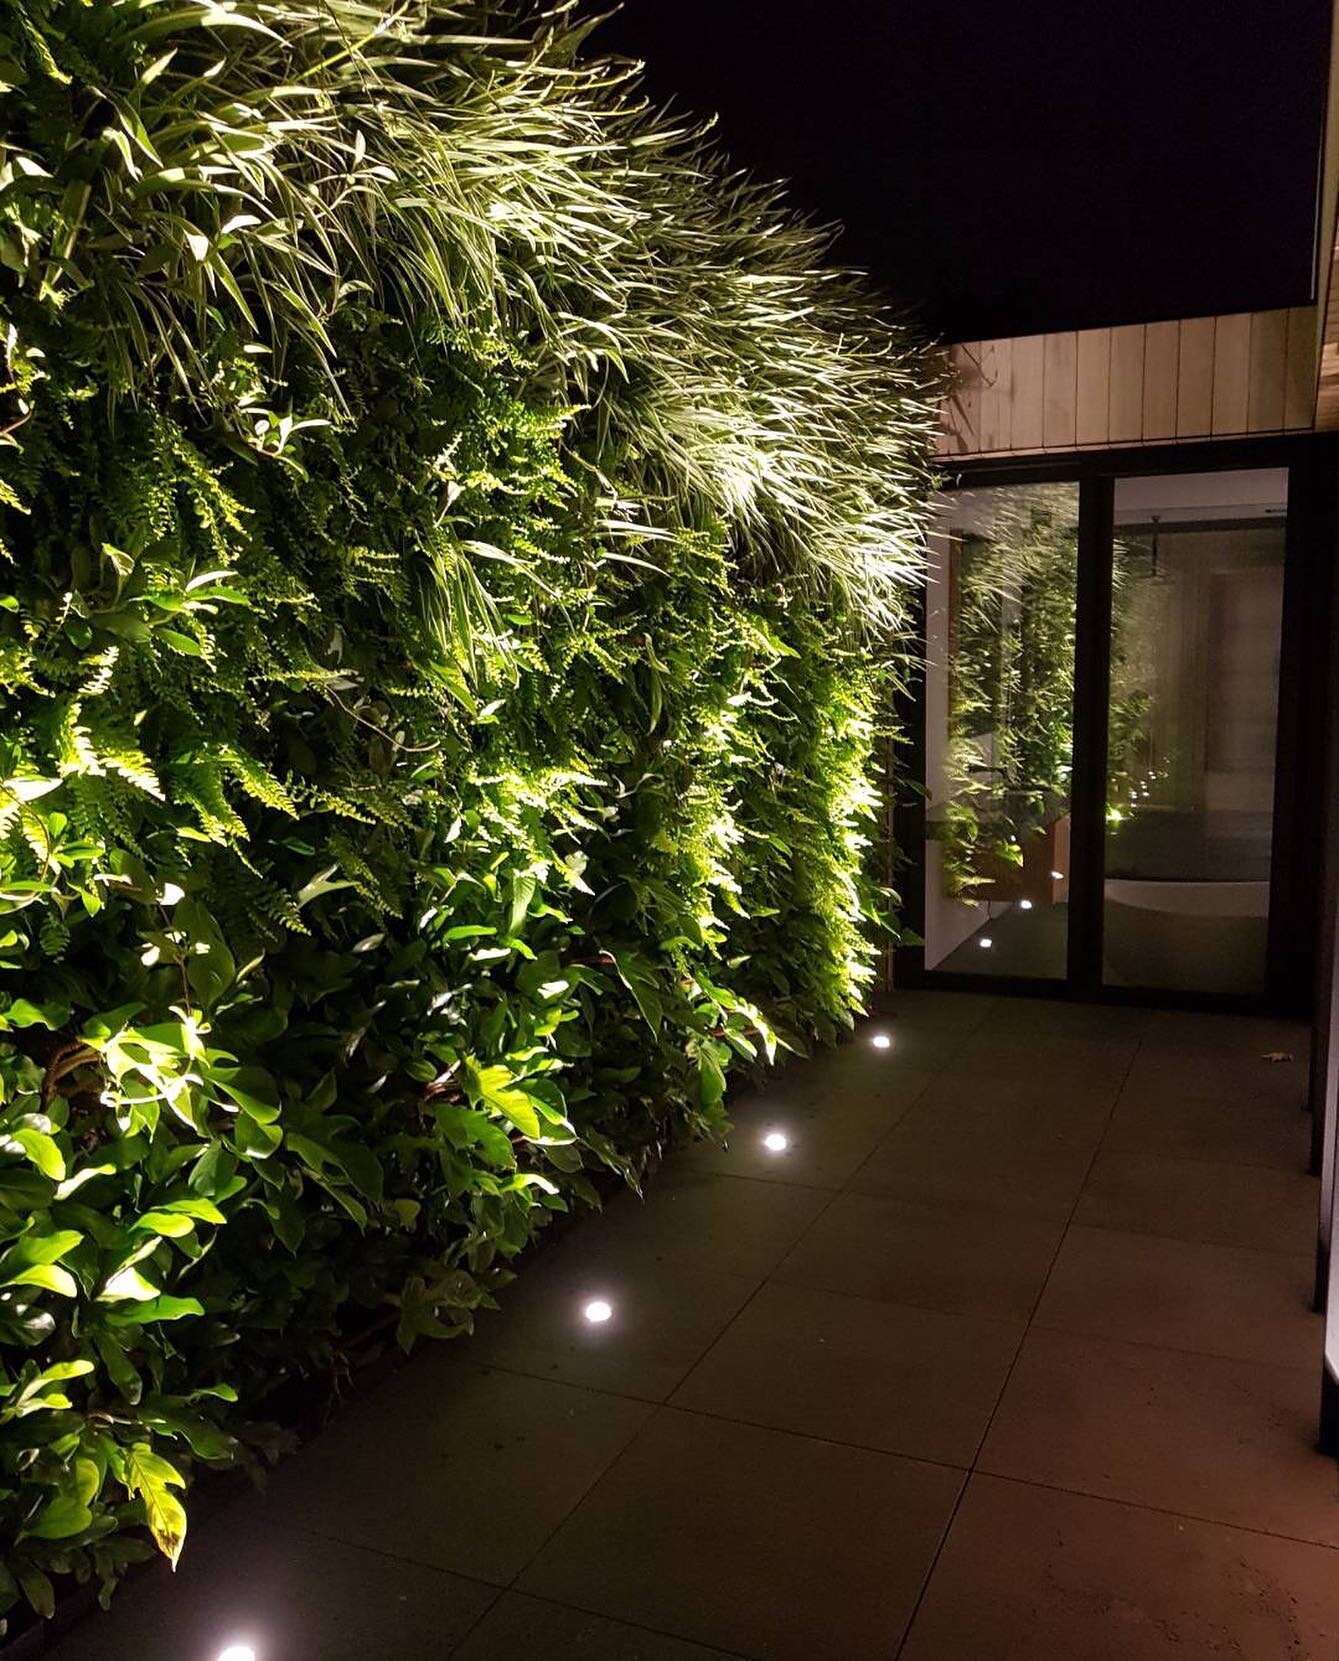 This is our green wall created for @built.by.guild 
The low voltage lighting really brings it to life at night 
Green wall supplier @martinkellockpotsnplanters 
Green wall install @easternlandscapes 
Plant supplier @biemond_nurseries